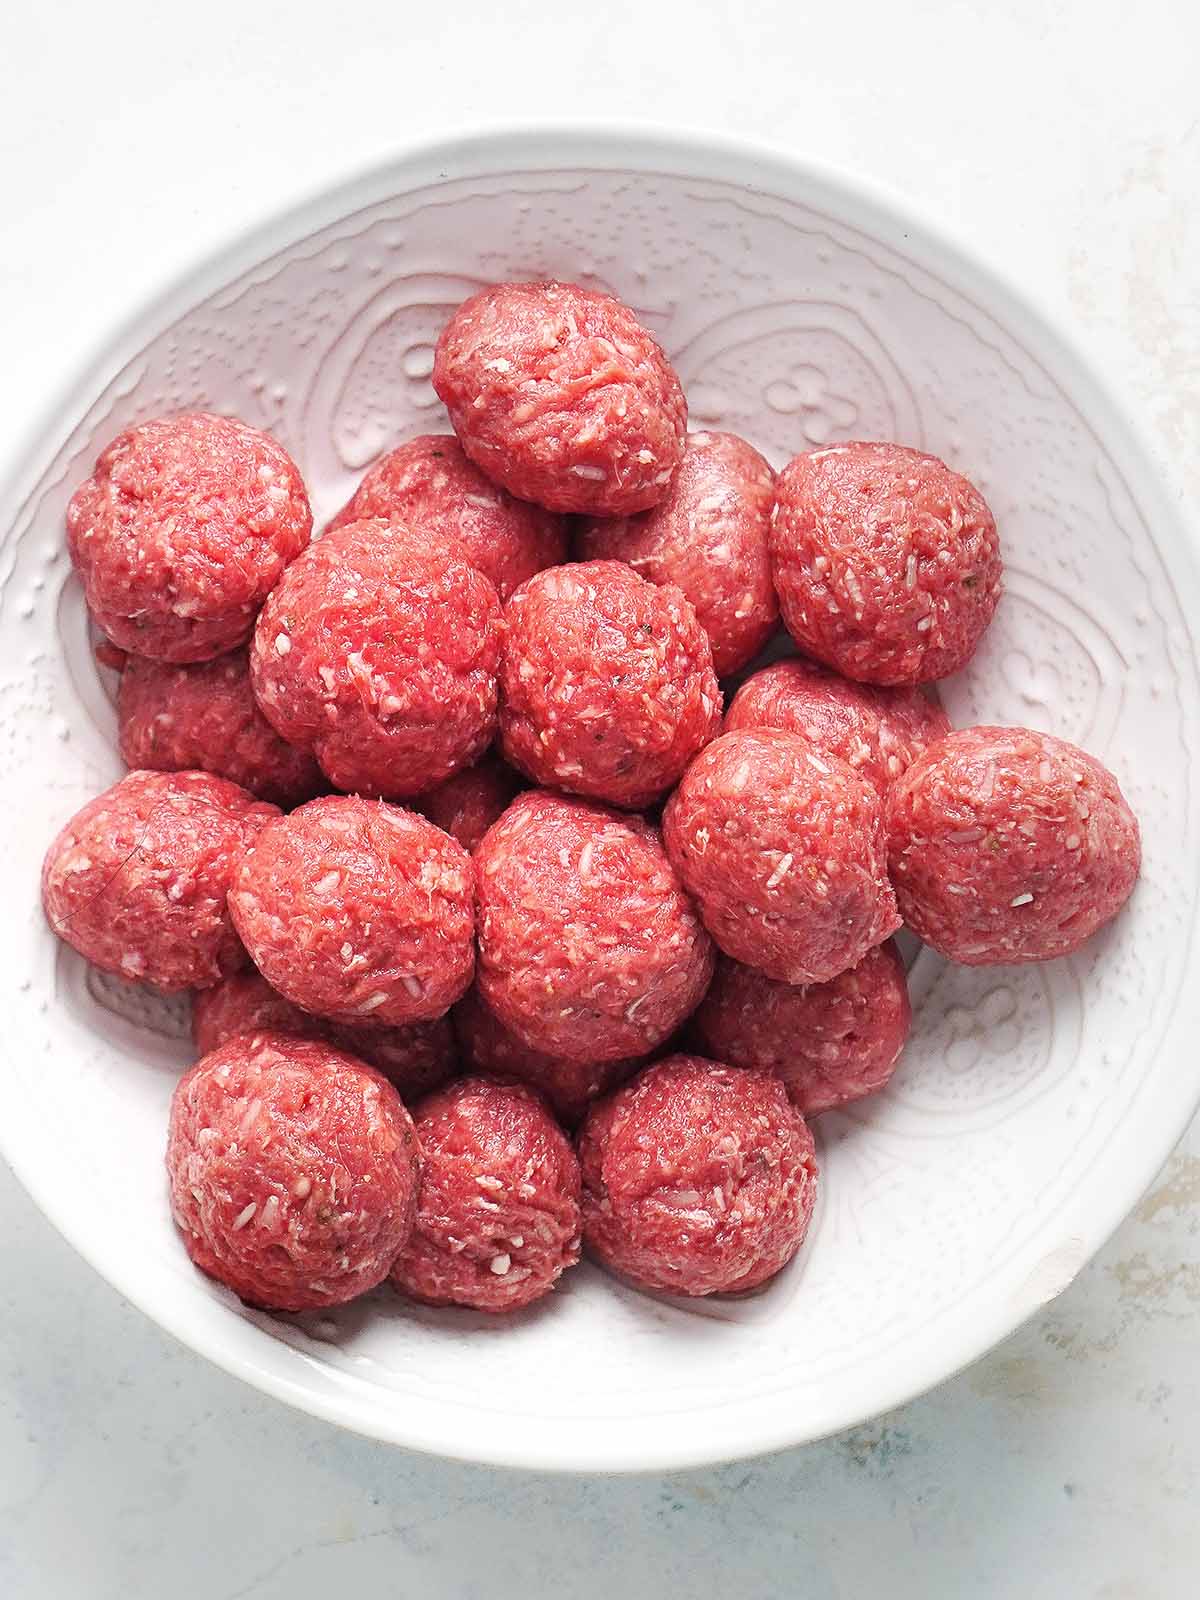 A bowl with raw meatballs.